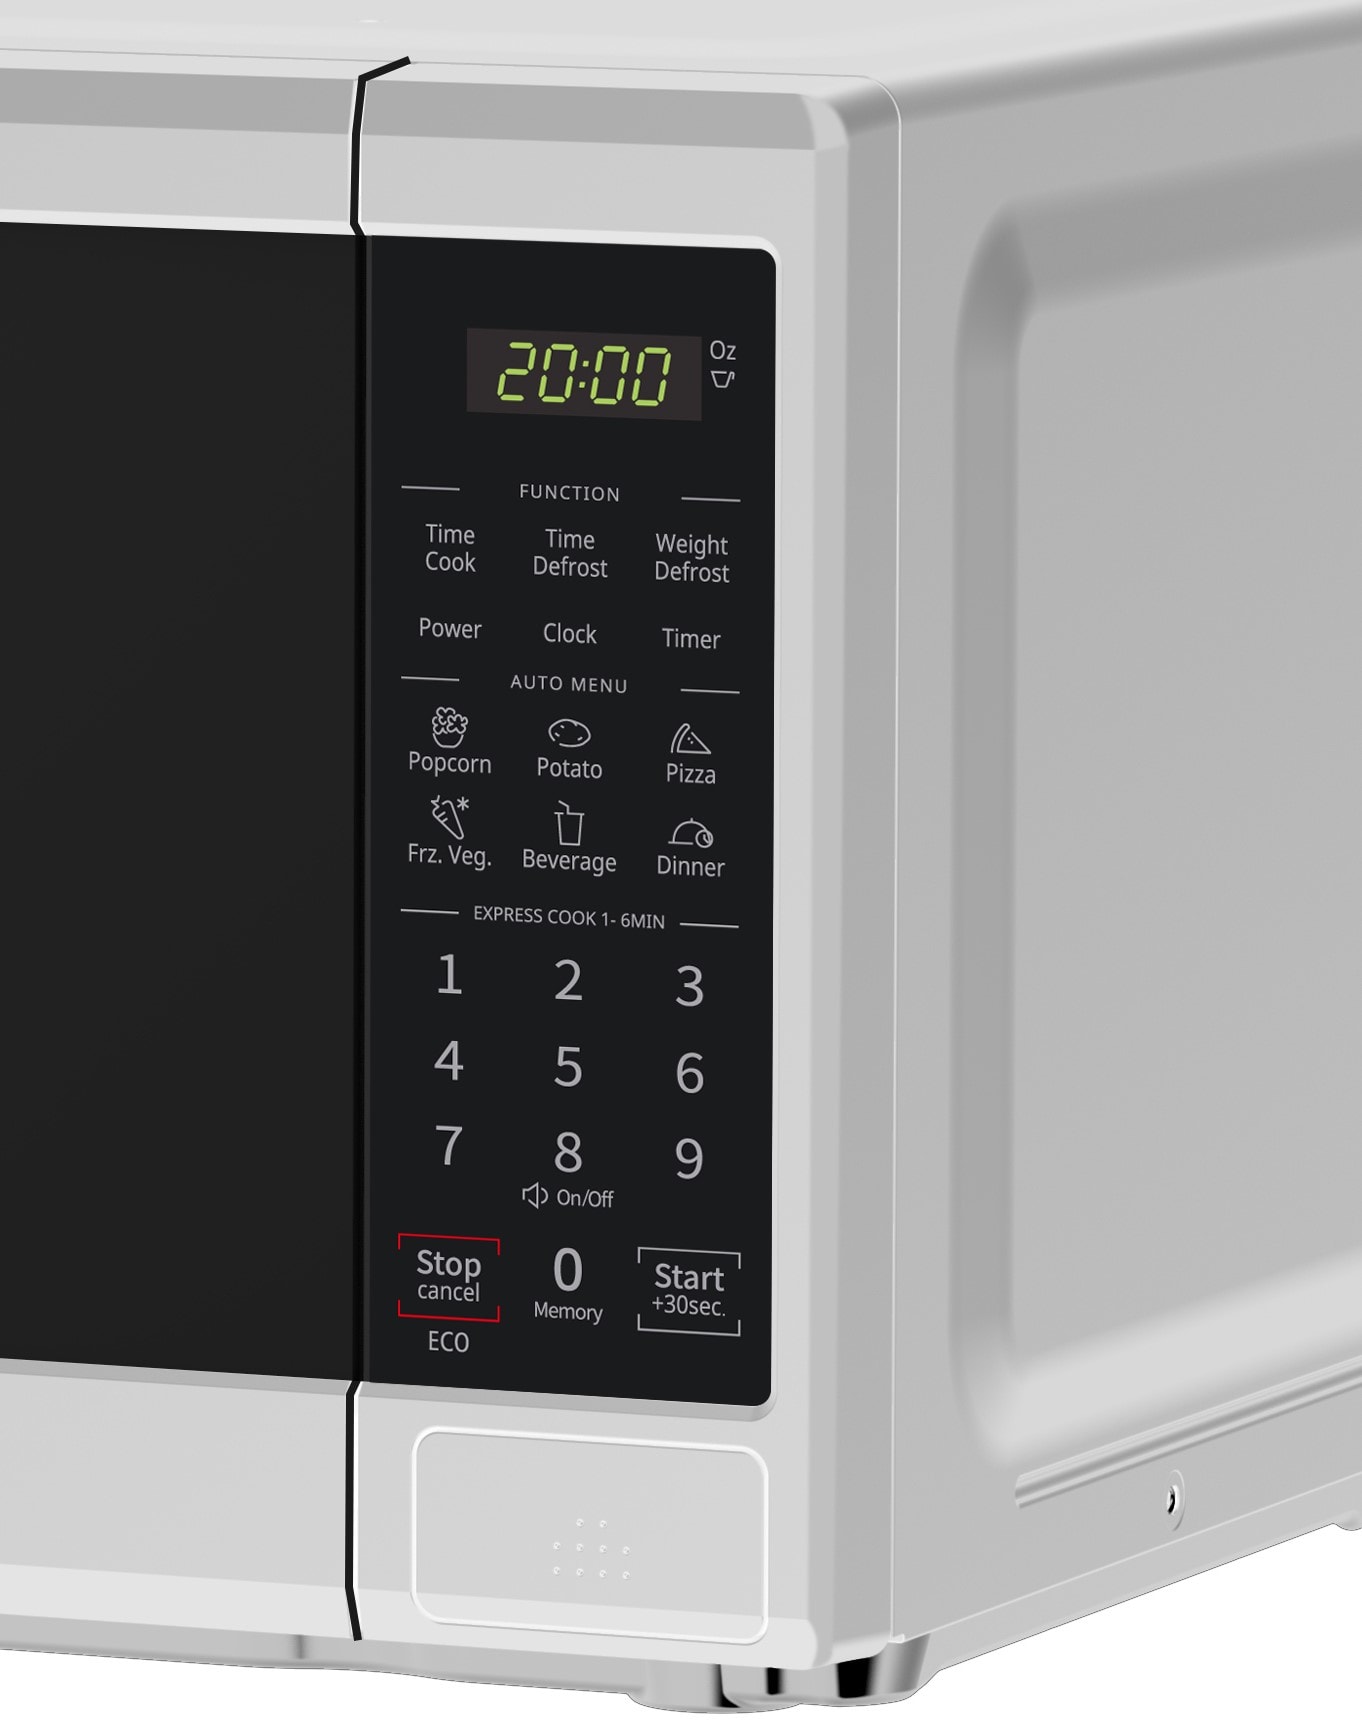 Up To 16% Off on 700W Countertop Microwave Ove